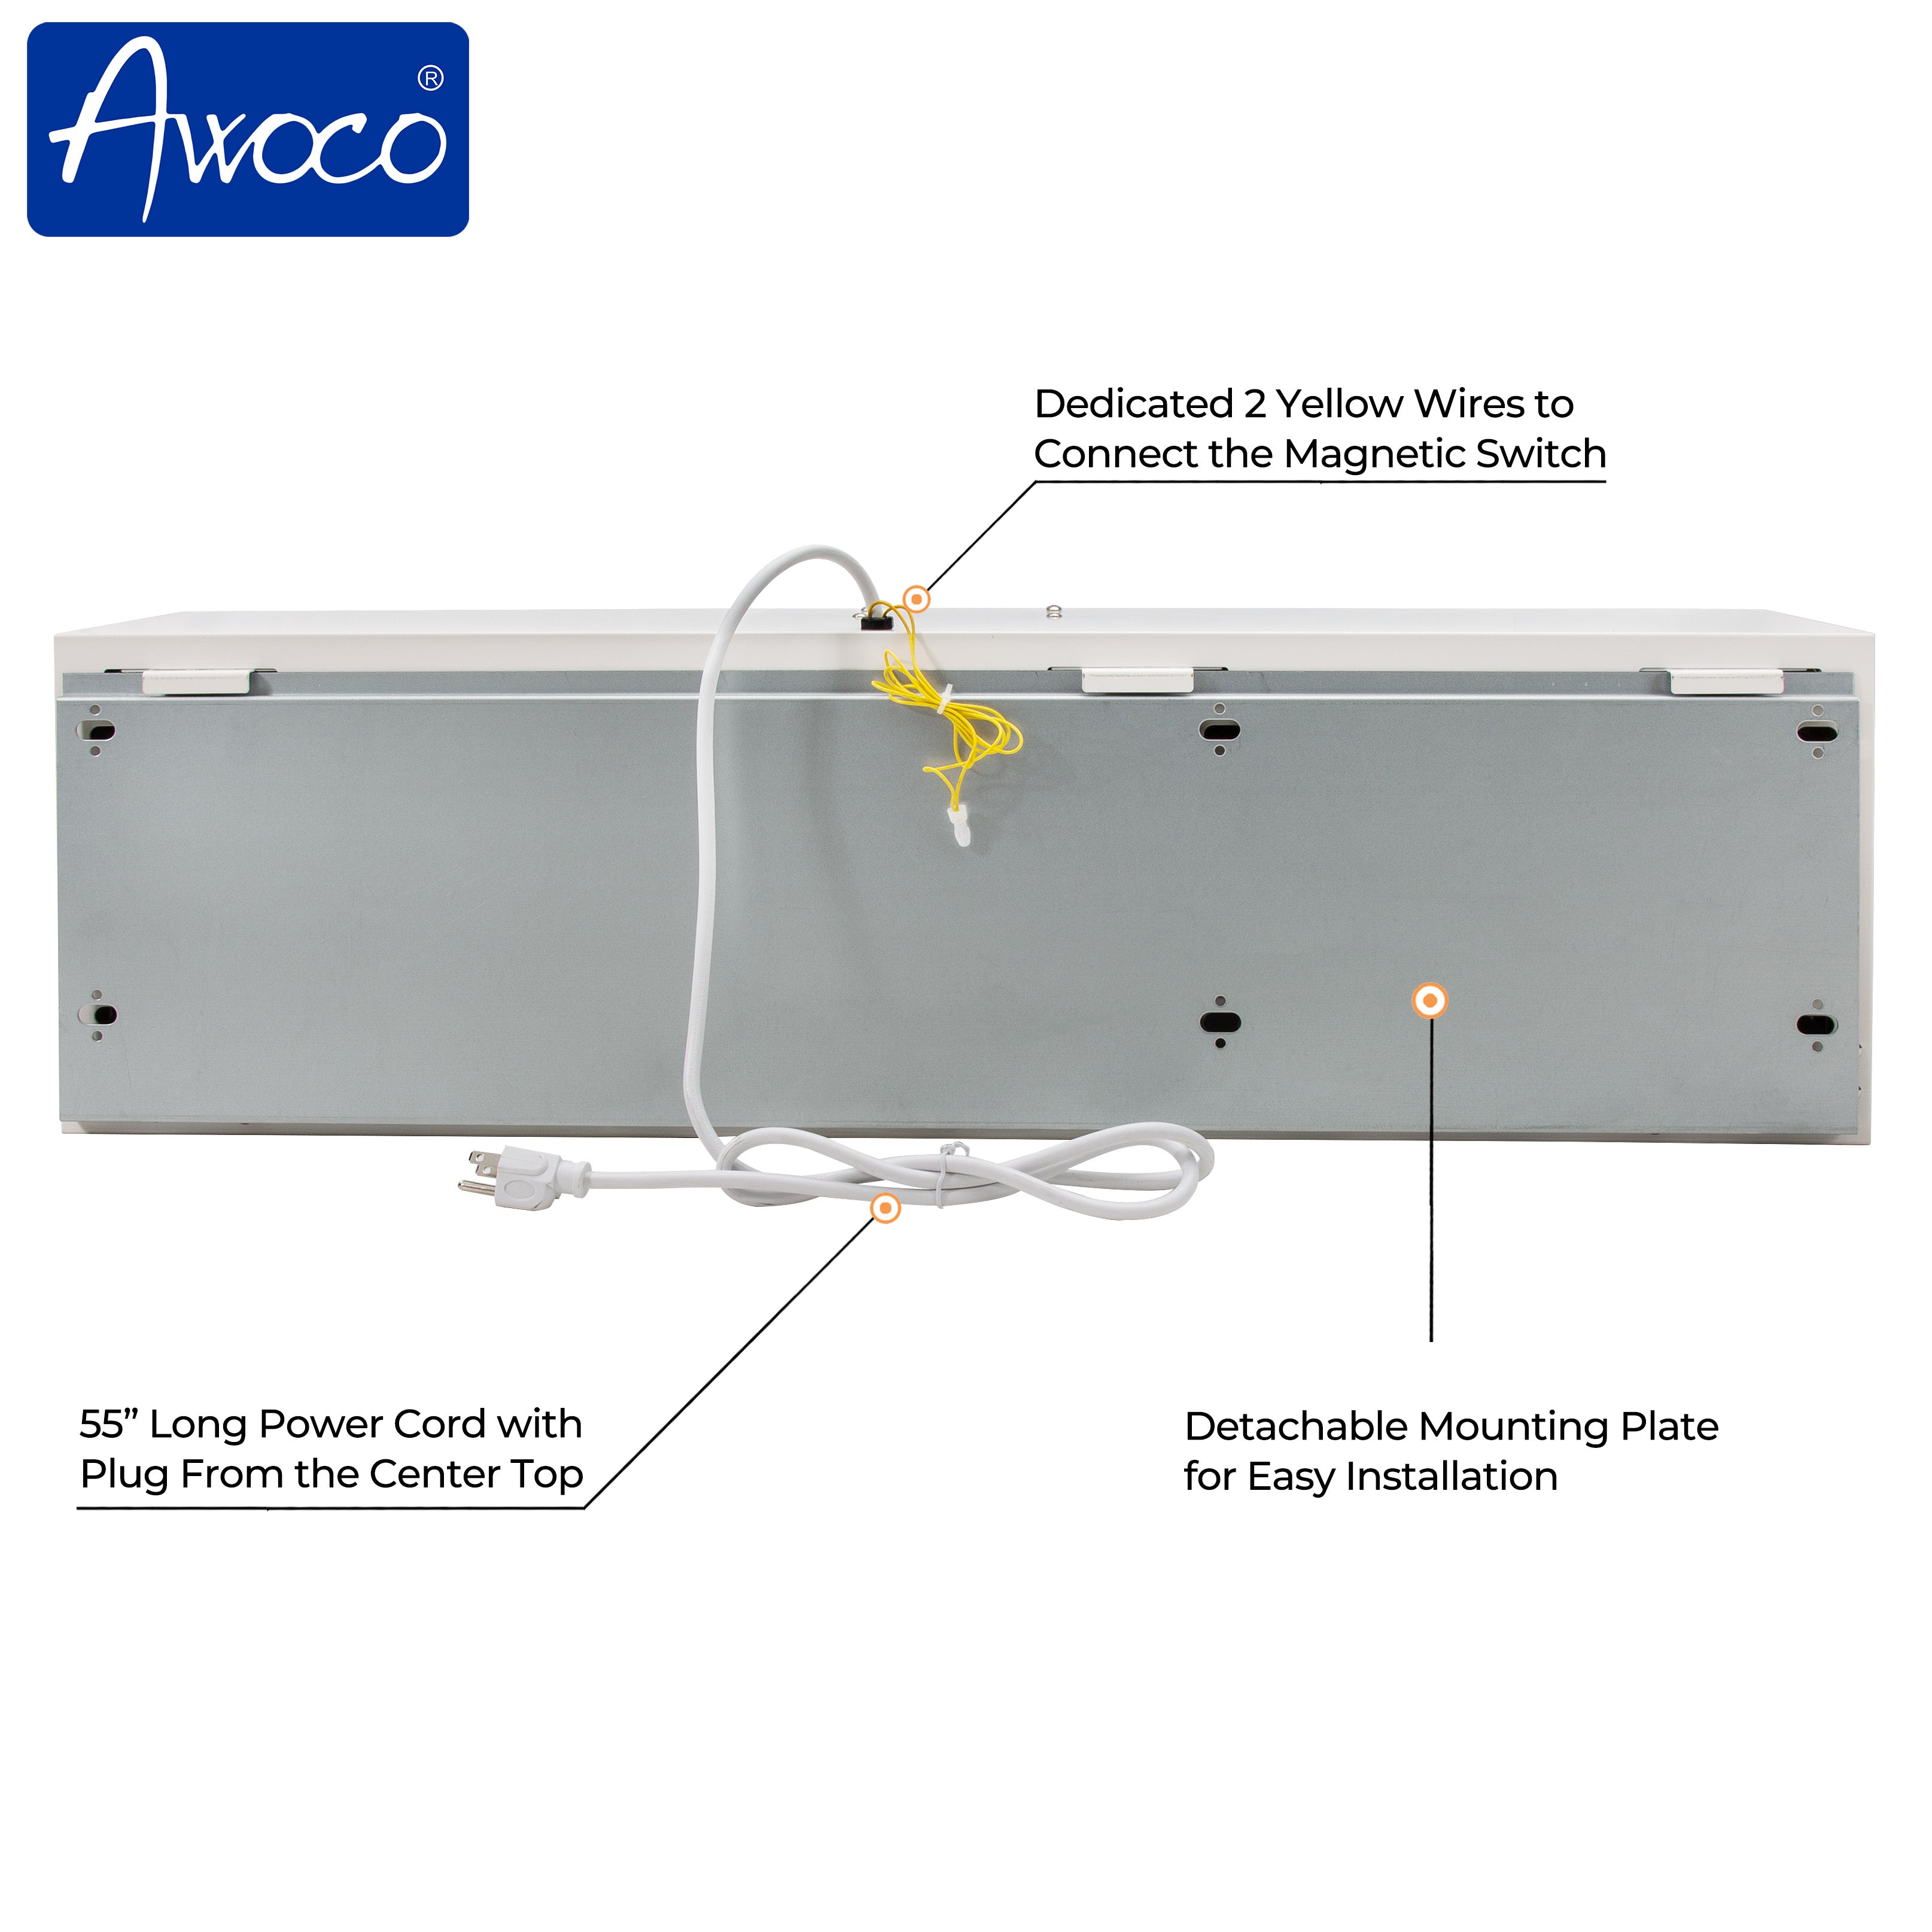 Awoco 72” Super Power 2 Speeds 2350 CFM Commercial Indoor Air Curtain, CE Certified, 120V Unheated with an Easy-Install Magnetic Switch